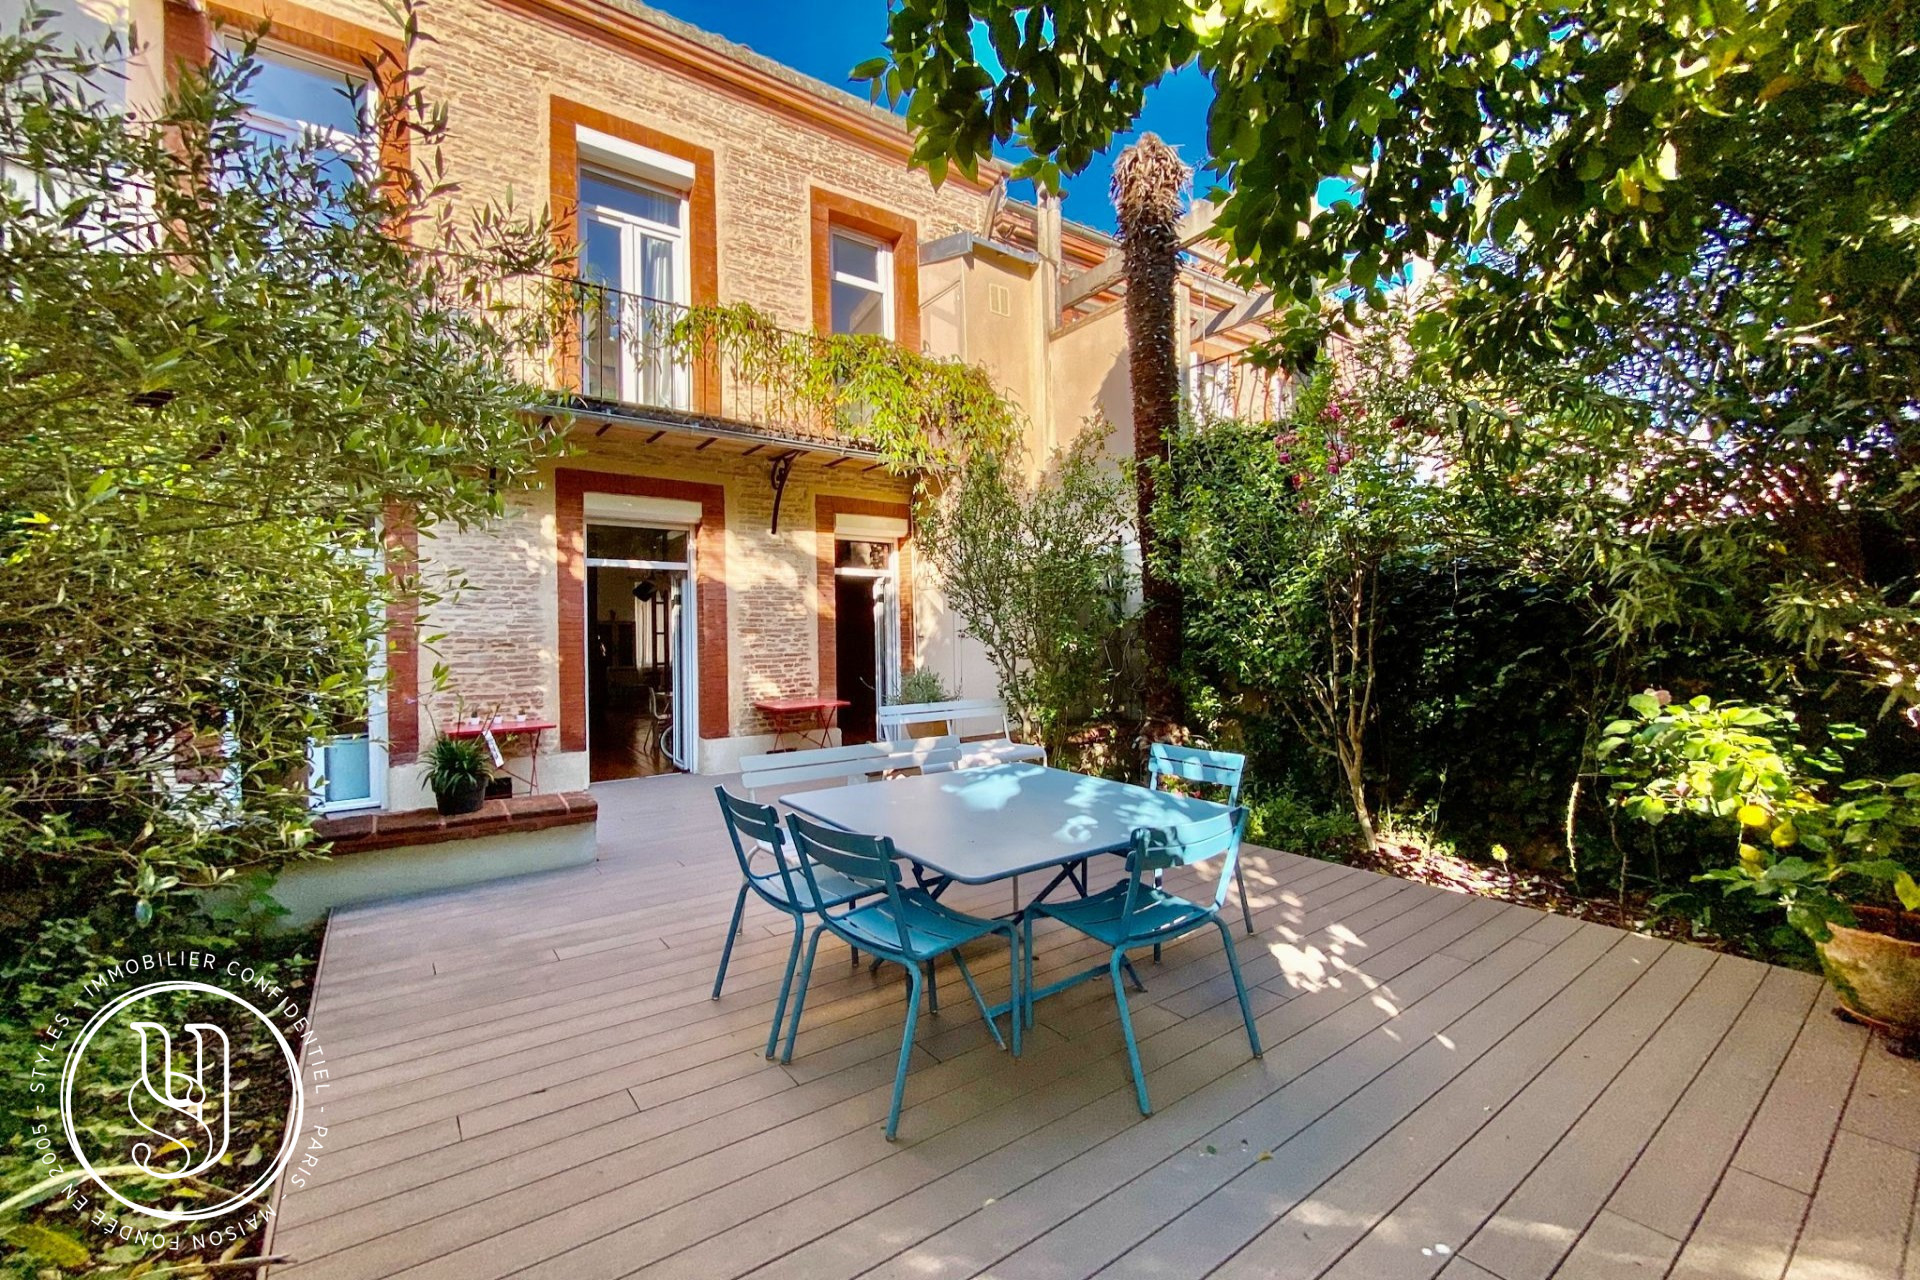 Toulouse - A superb family townhouse with garden, ideally located in the